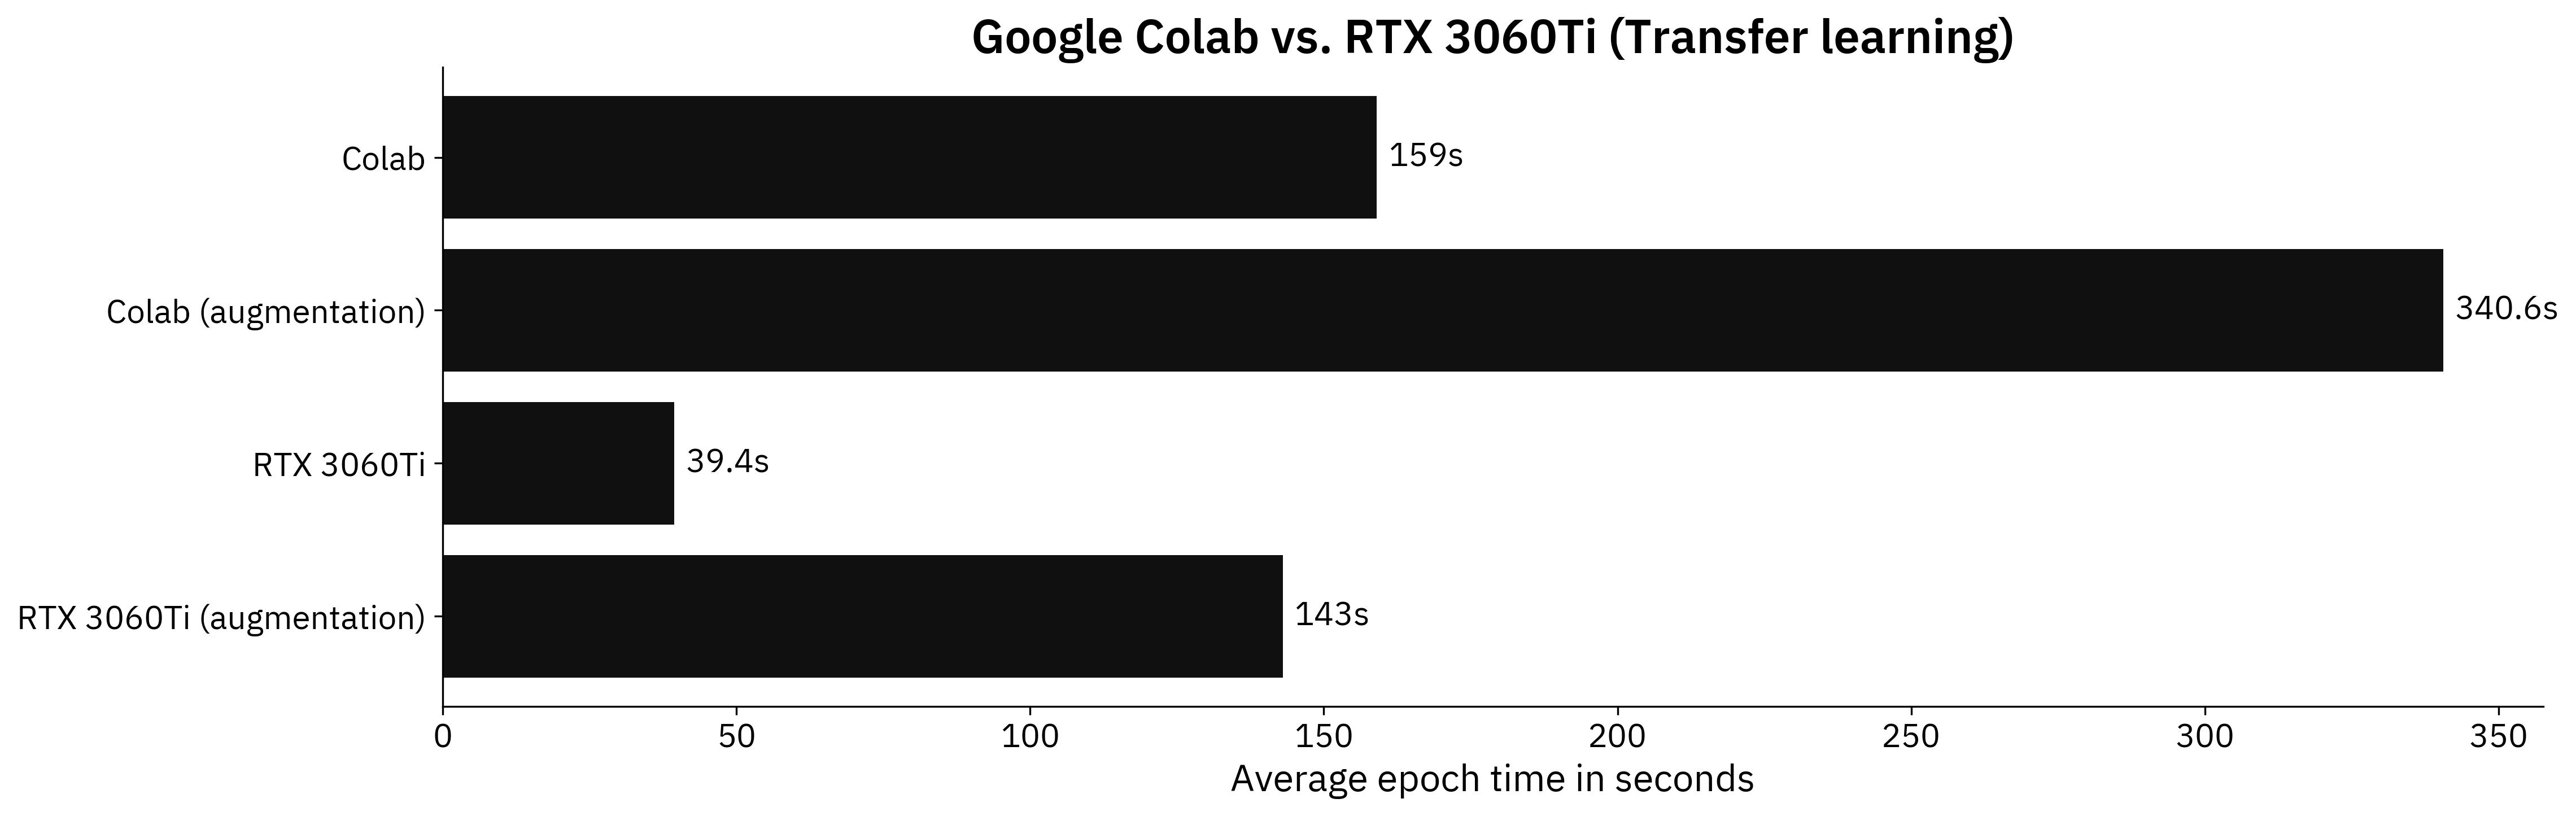 Image 3 - Benchmark results on a transfer learning model (Colab: 159s; Colab (augmentation): 340.6s; RTX: 39.4s; RTX (augmented): 143s) (image by author)